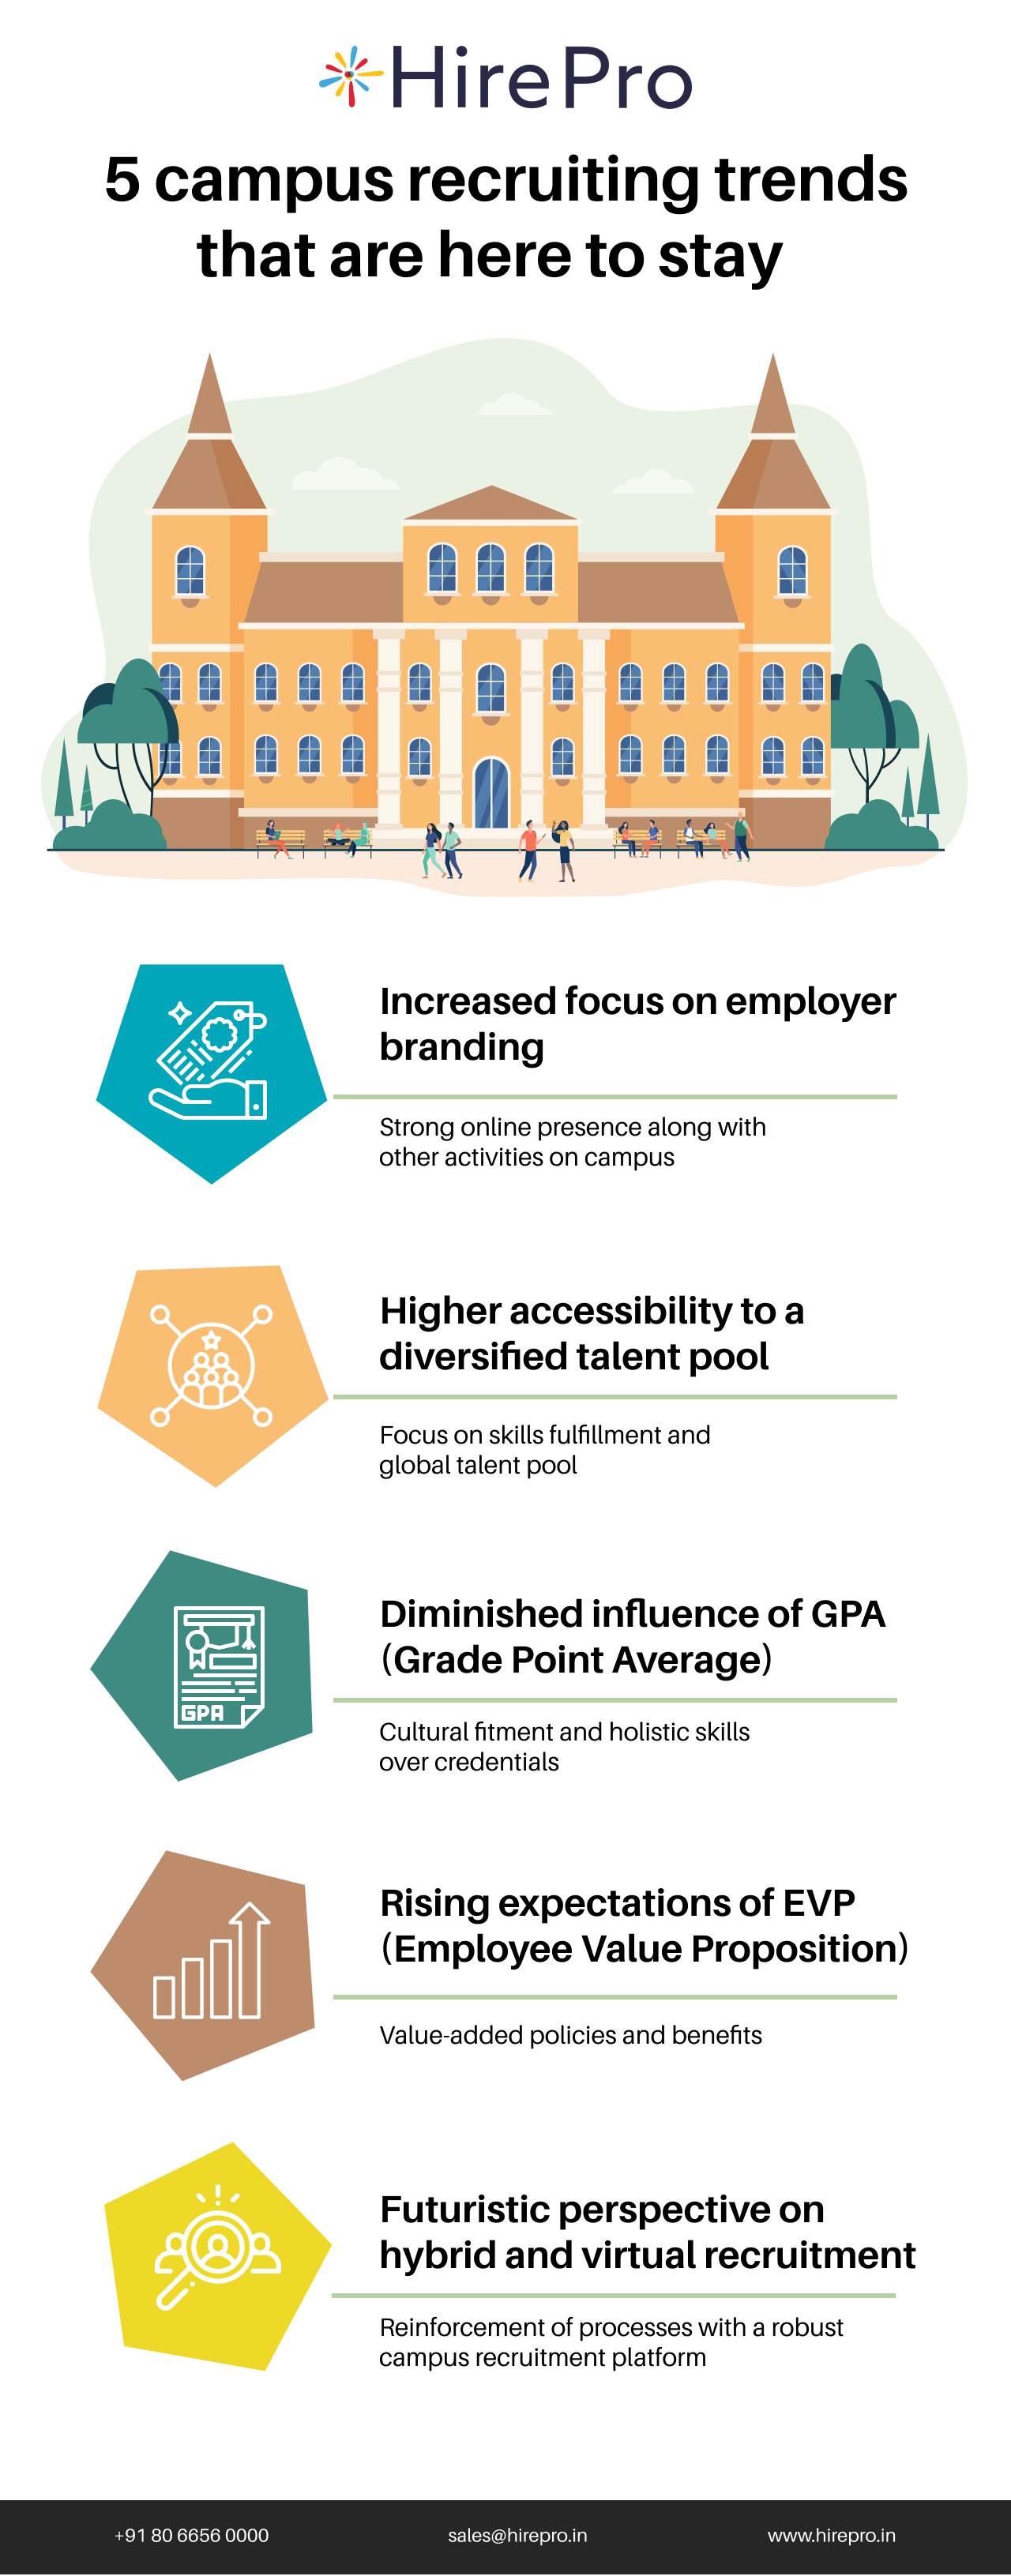 5 campus recruiting trends that are here to stay